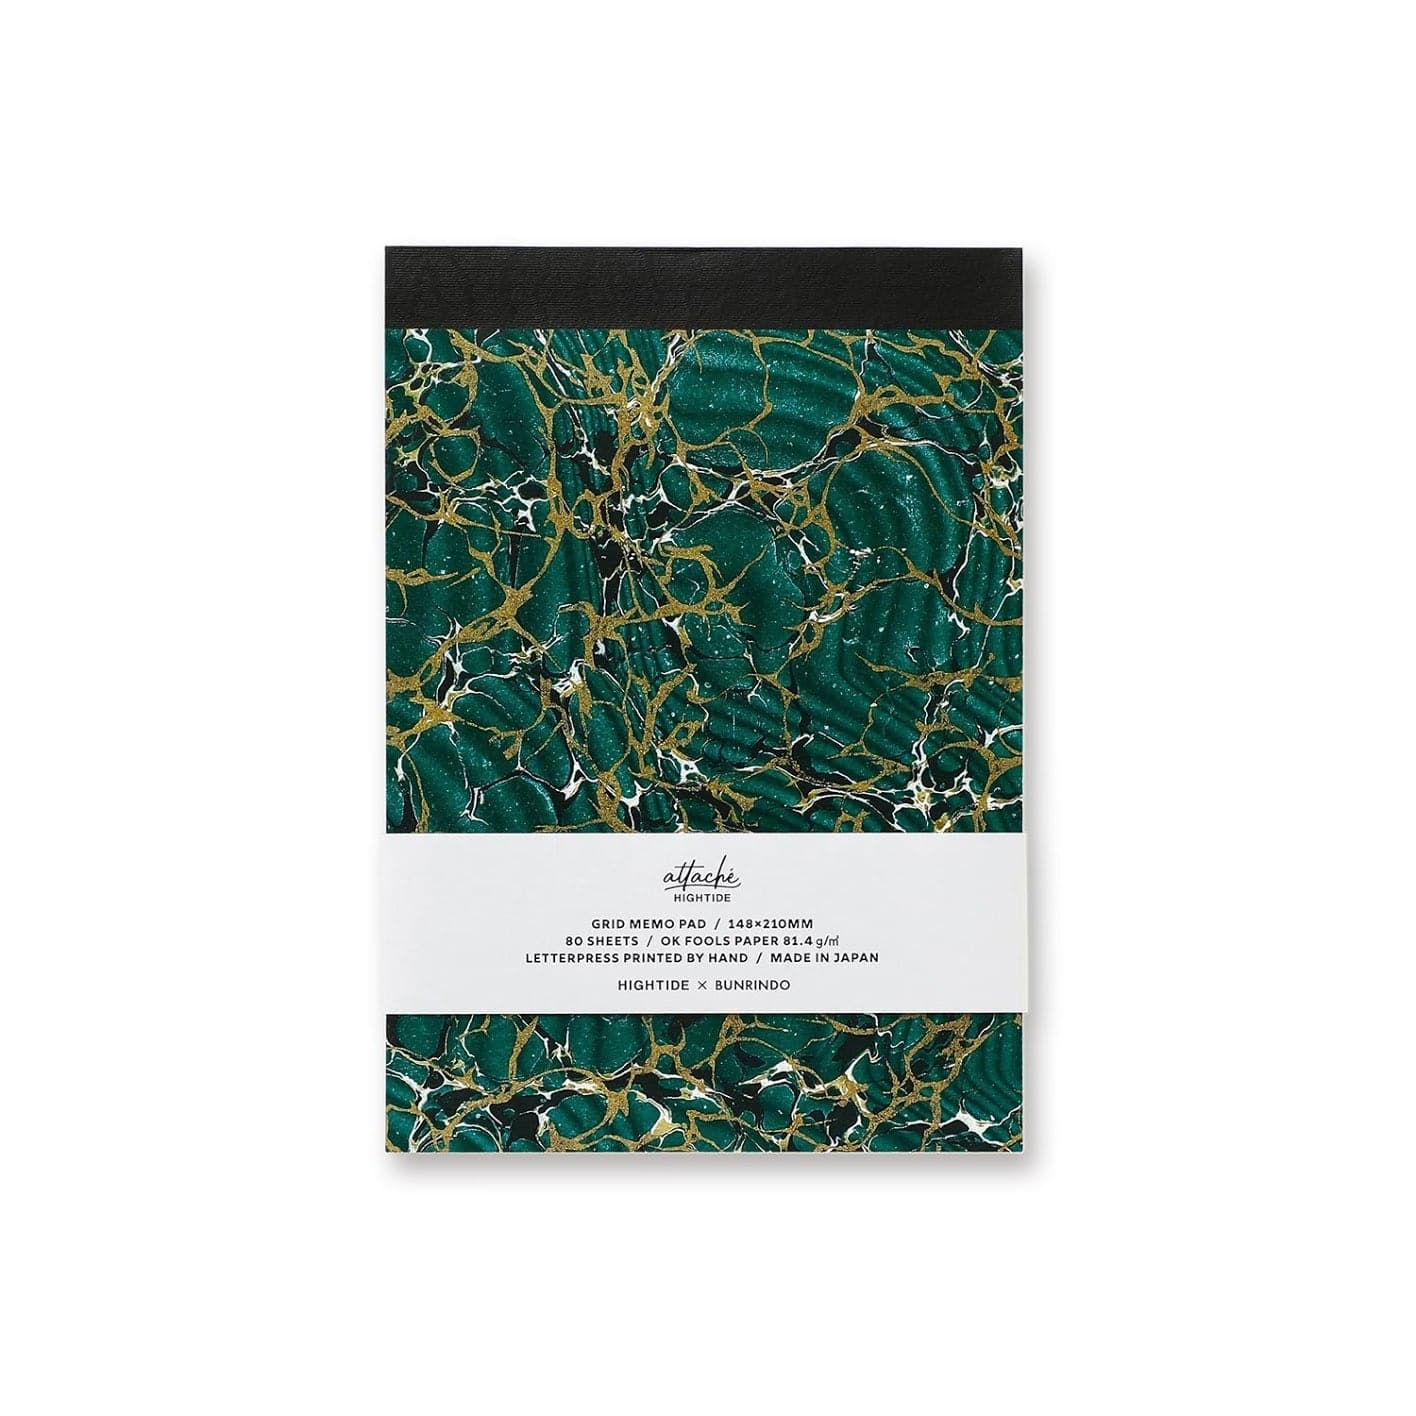 Hightide Limited Edition Attaché Letterpress Printed Memo Pad (A5, Grid) - Green